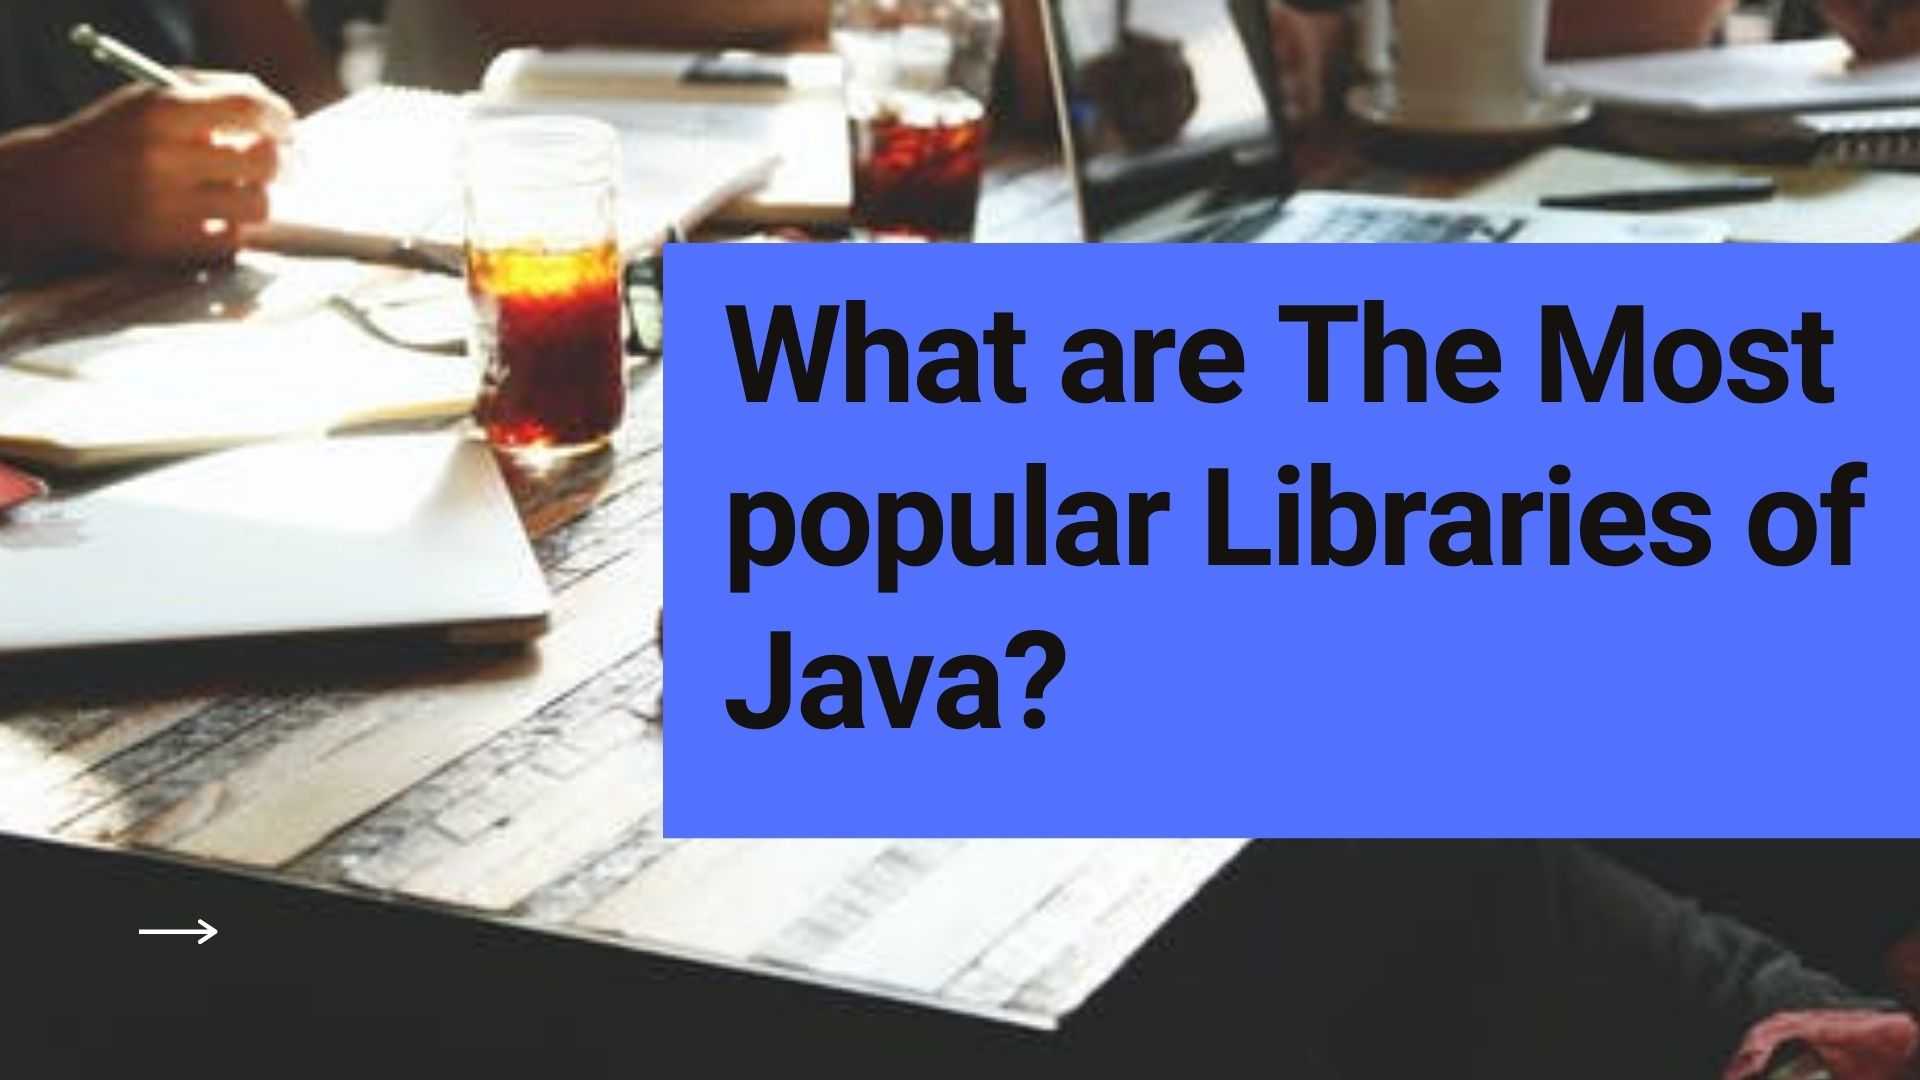 What are The Most popular Libraries of Java